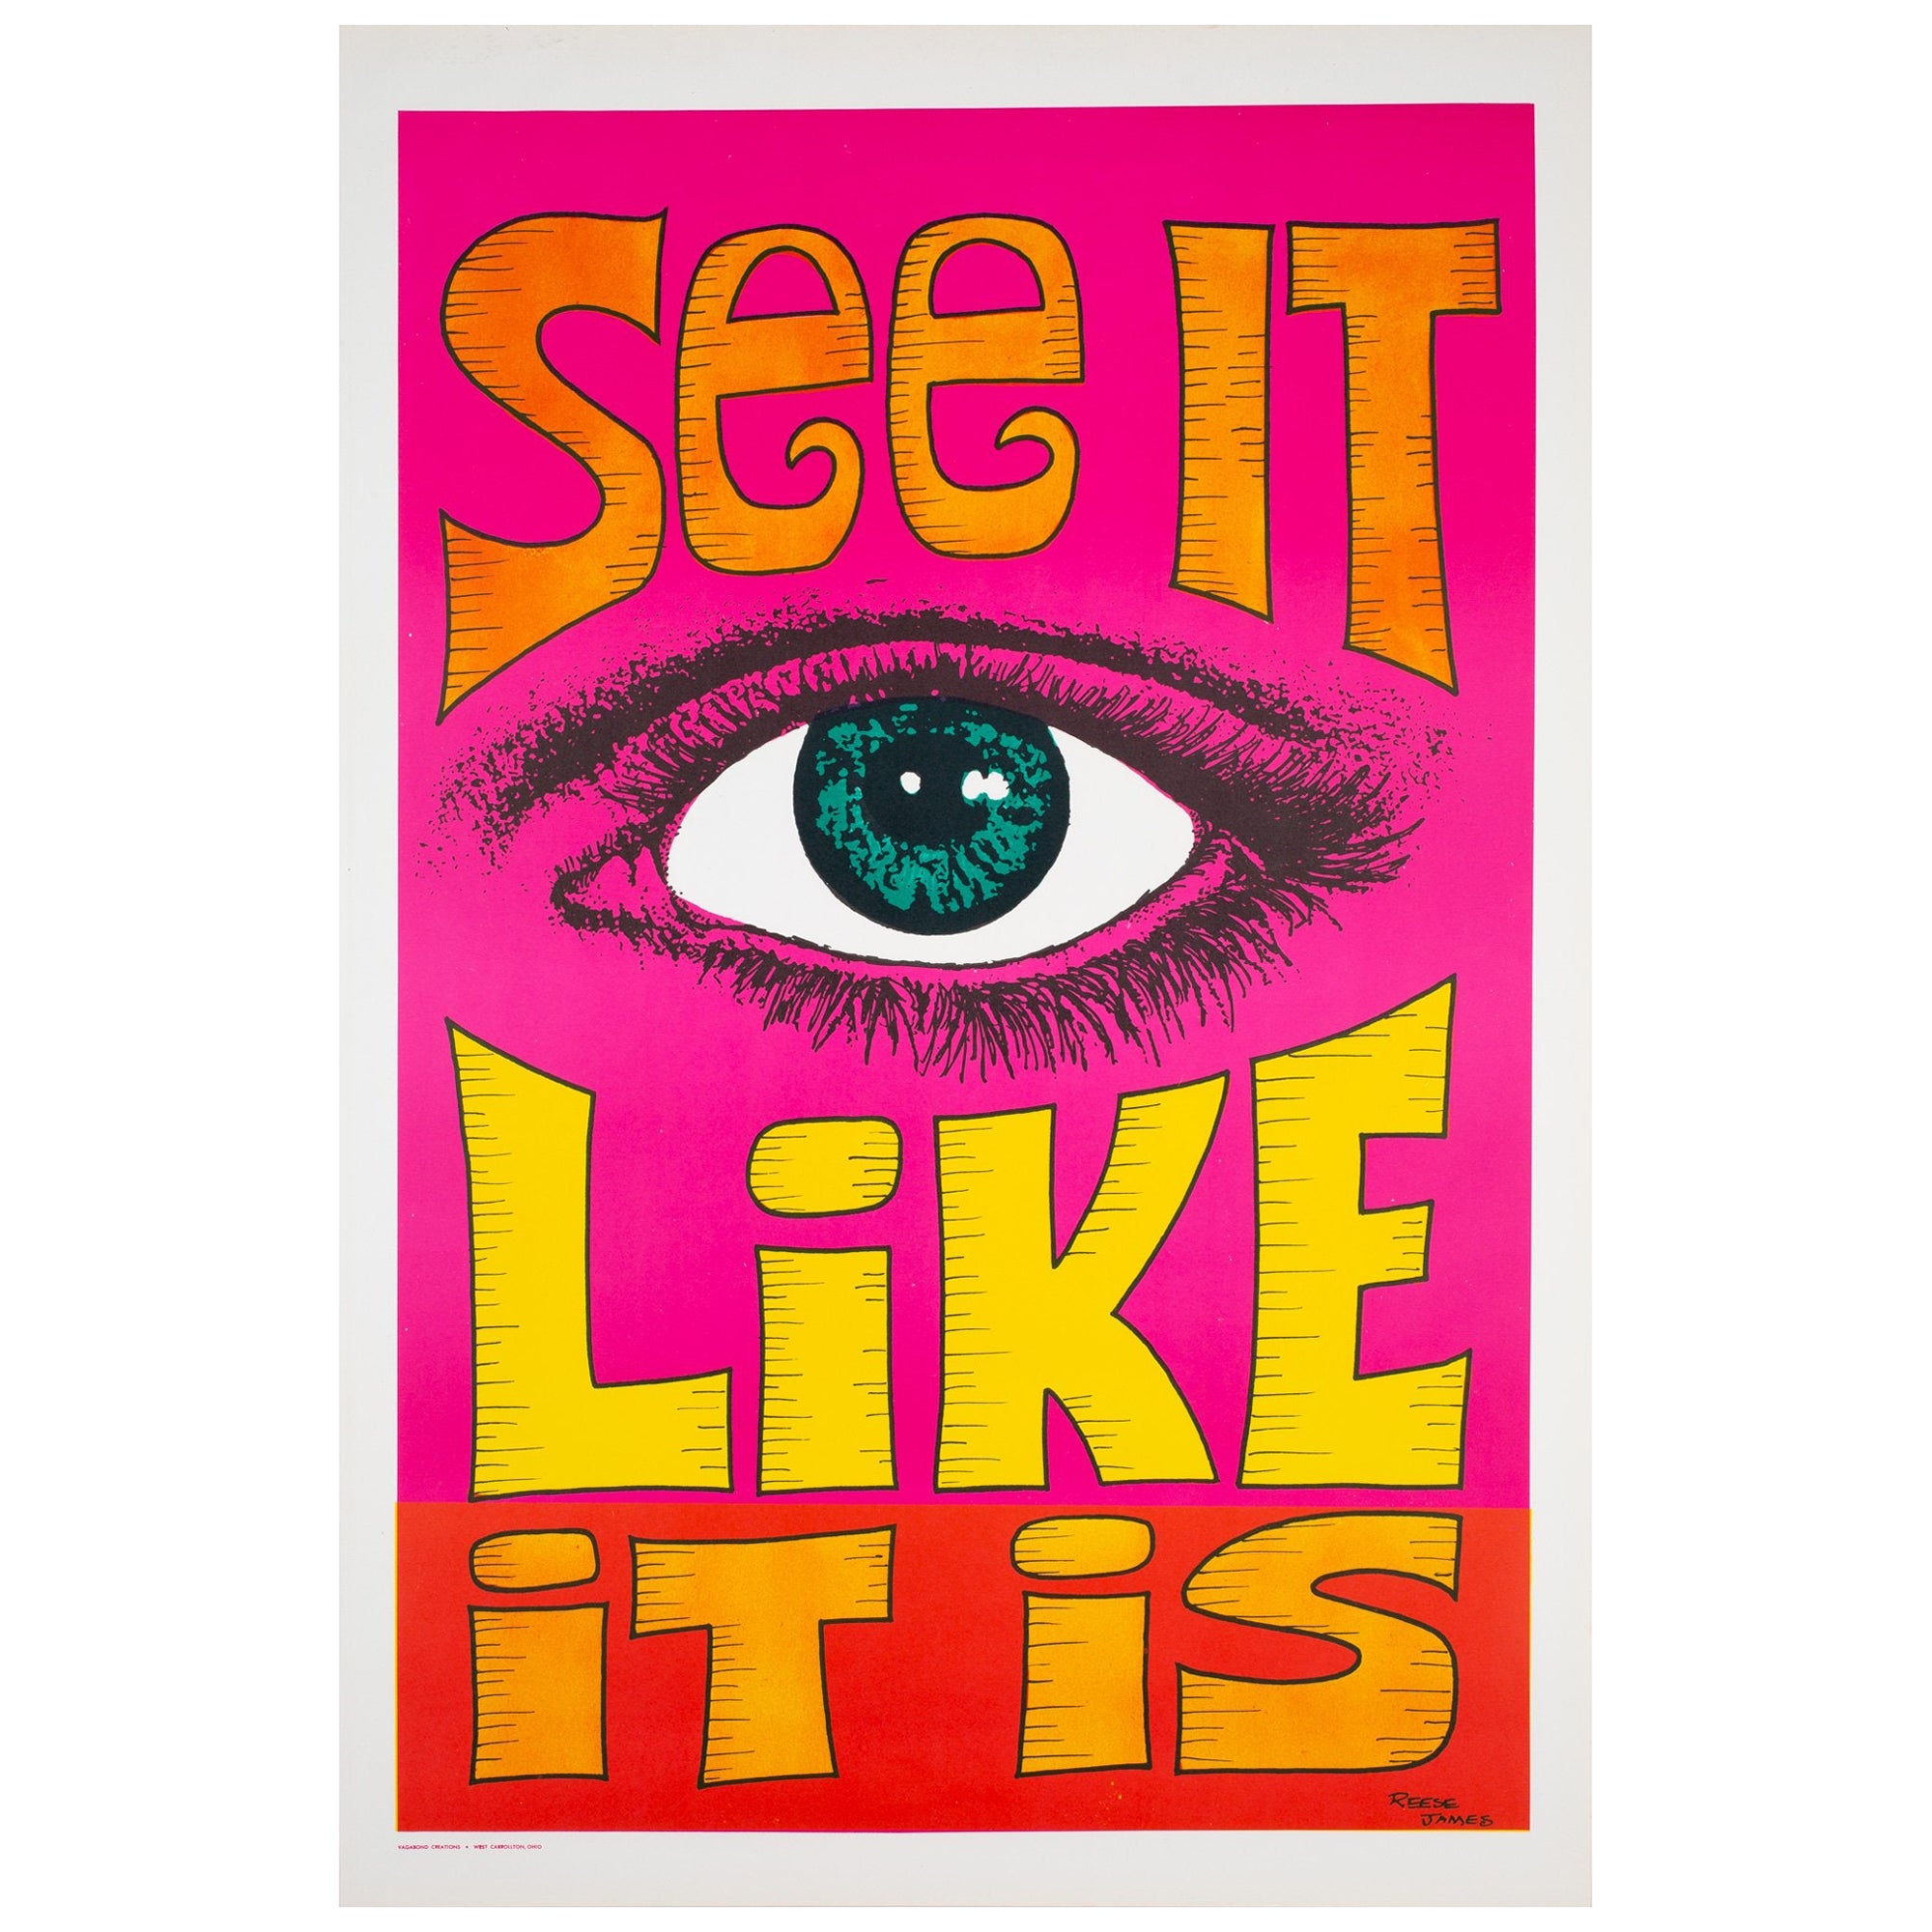 See It like It Is 1970s American Political/Protest Poster, Reese James